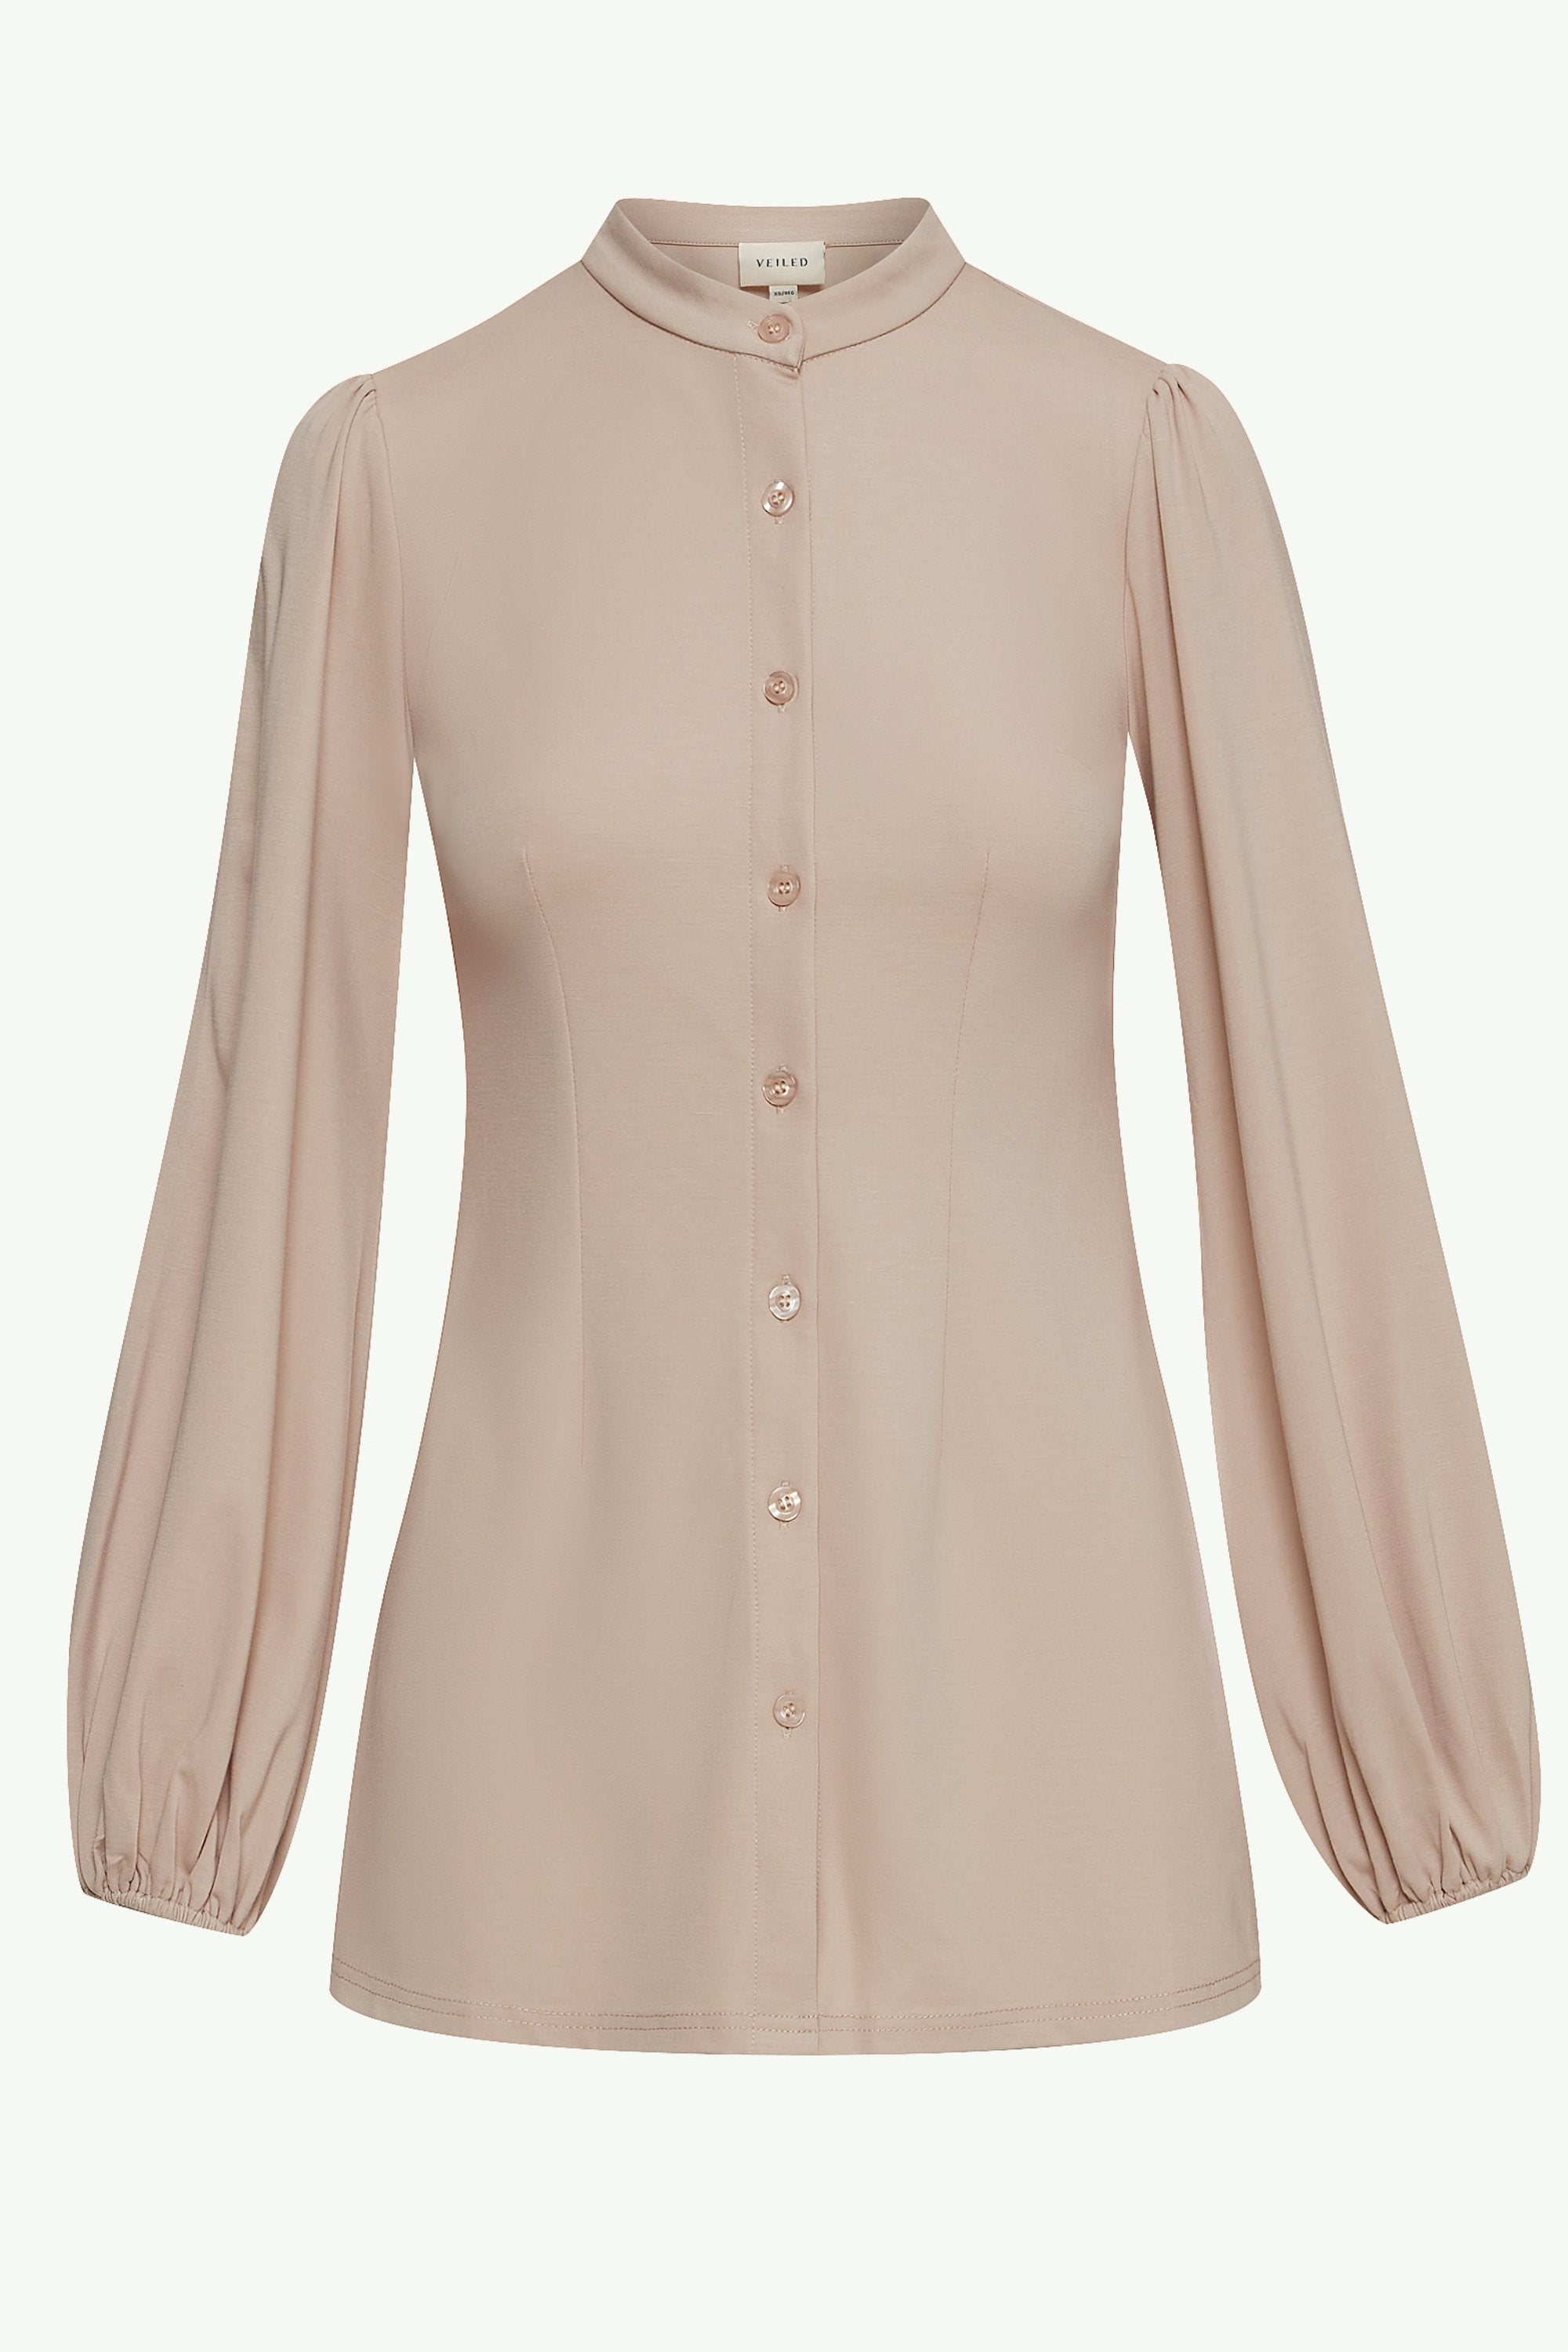 Rayana Jersey Button Down Top - Stone Clothing epschoolboard 